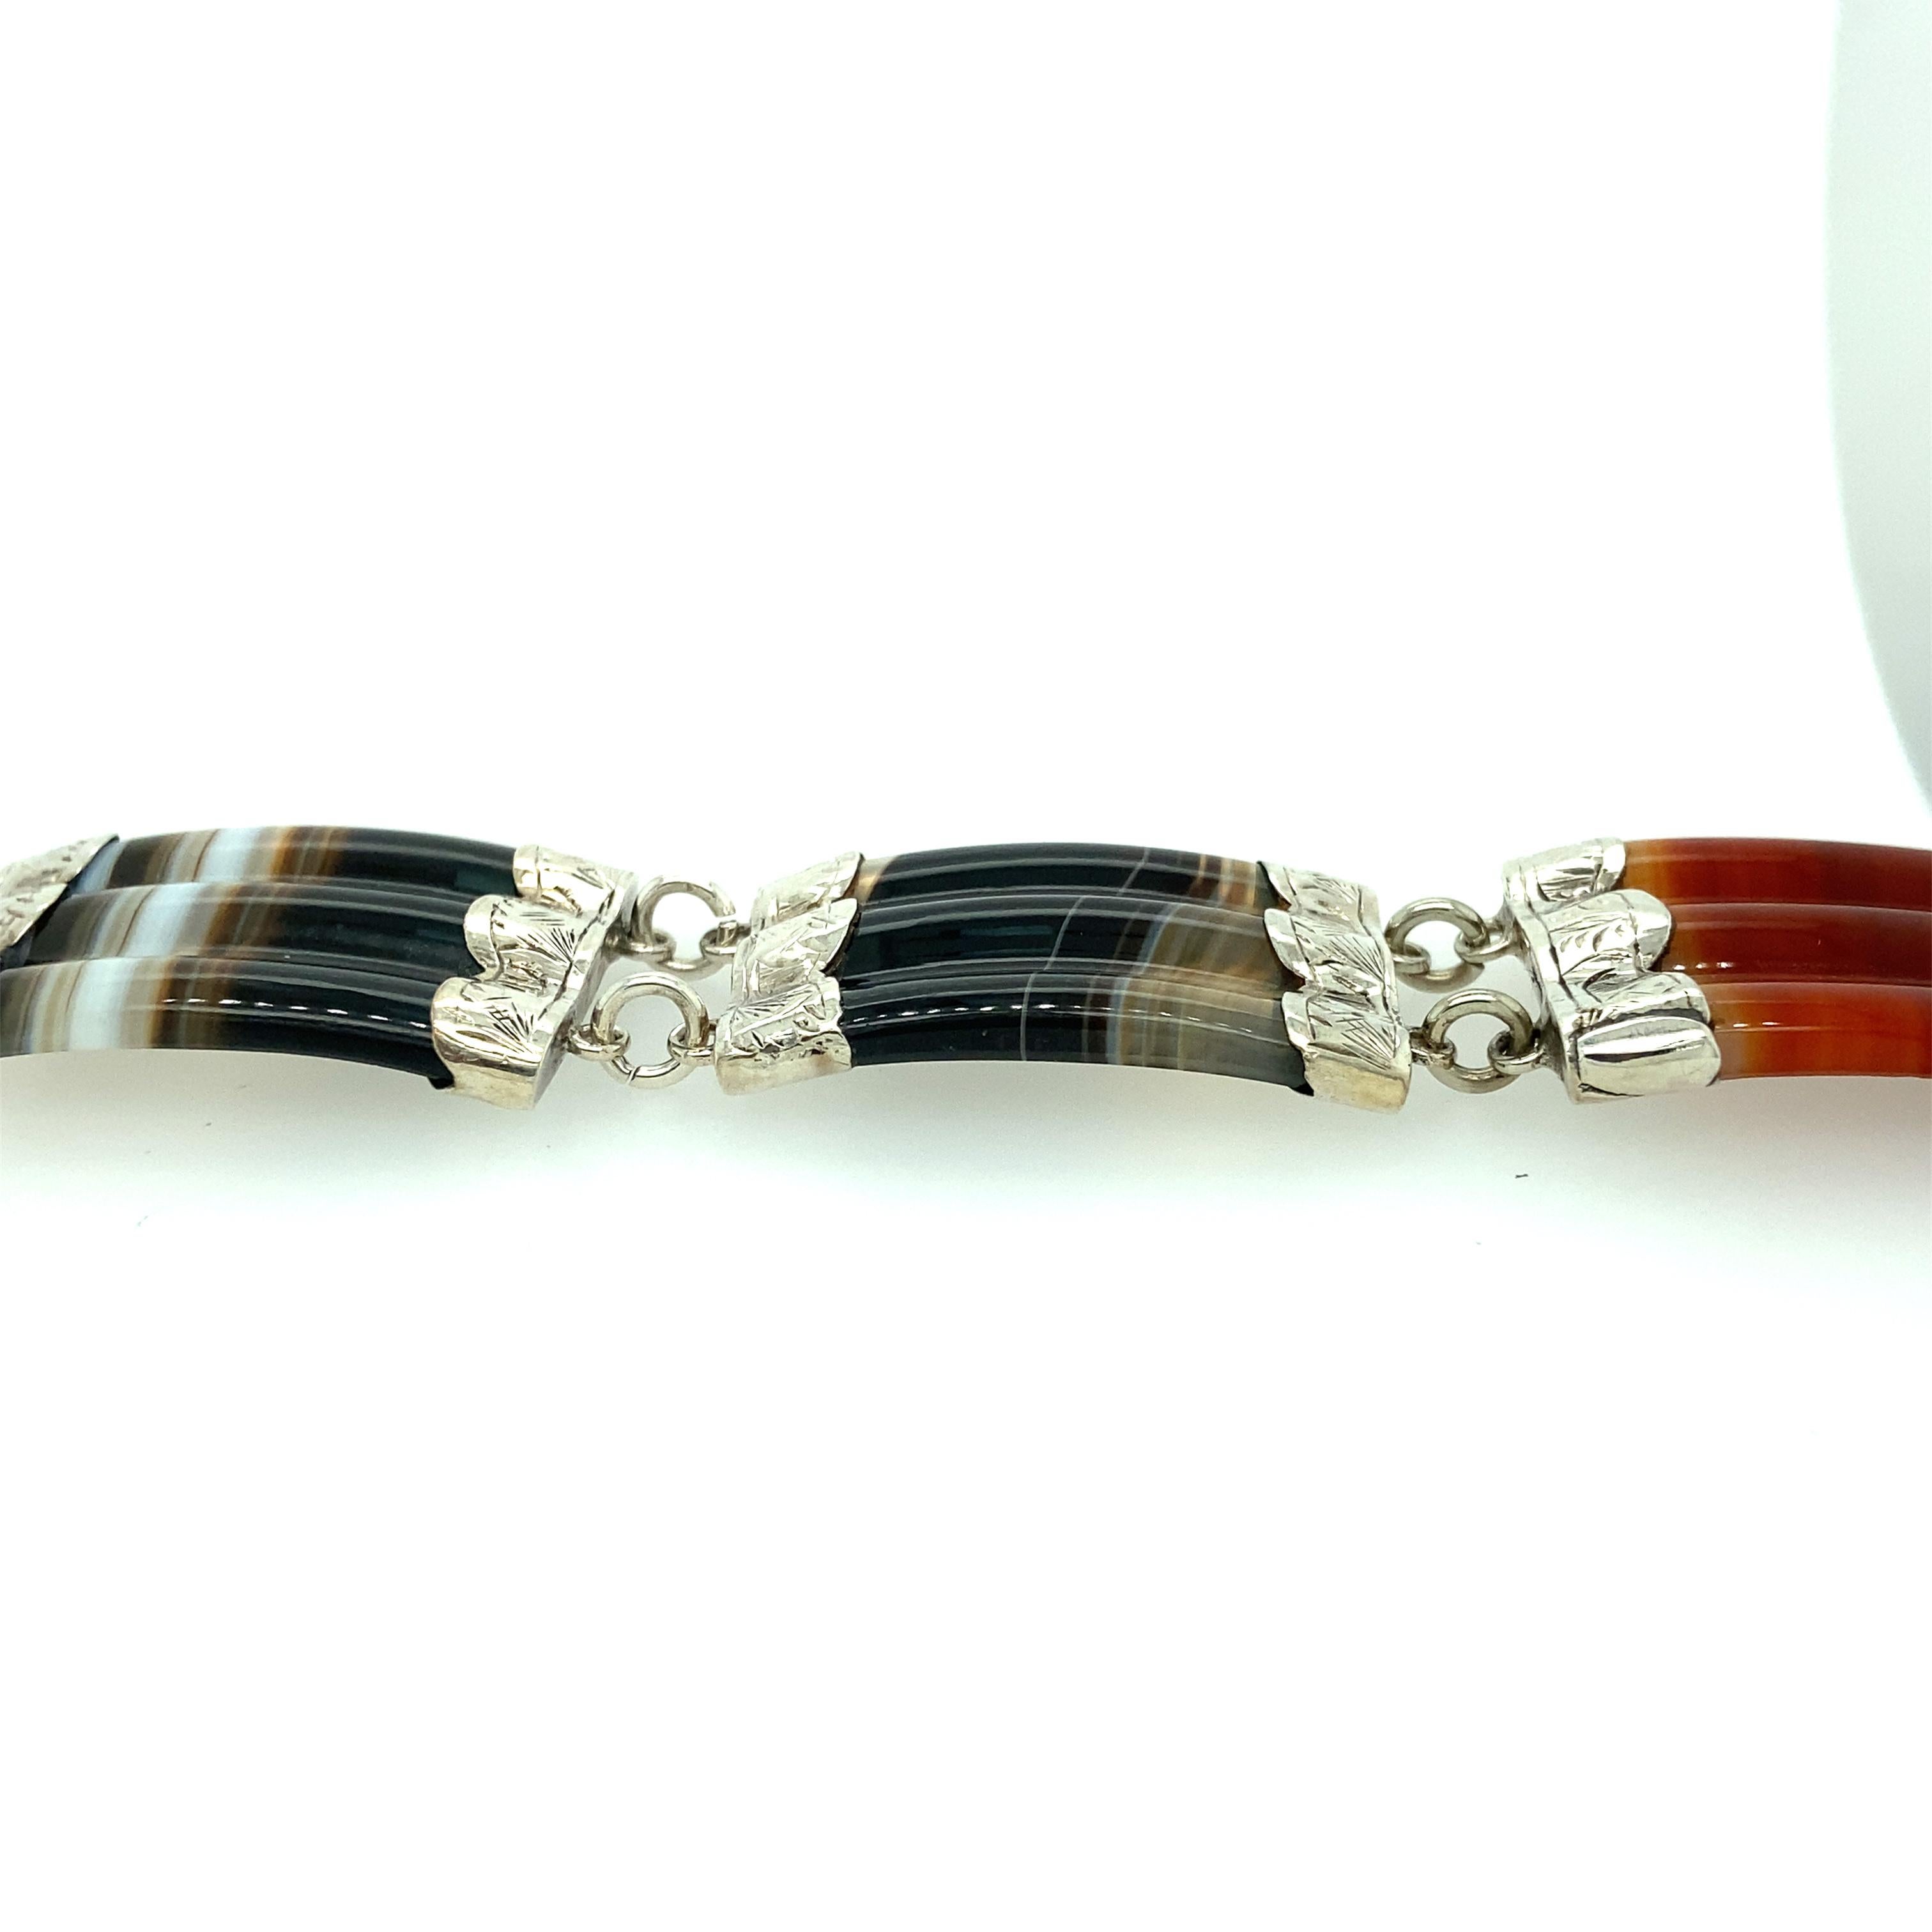 One sterling silver estate Victorian agate belt design bracelet measuring 8 inches long, 1 inch wide with belt style closure and safety clasp. 